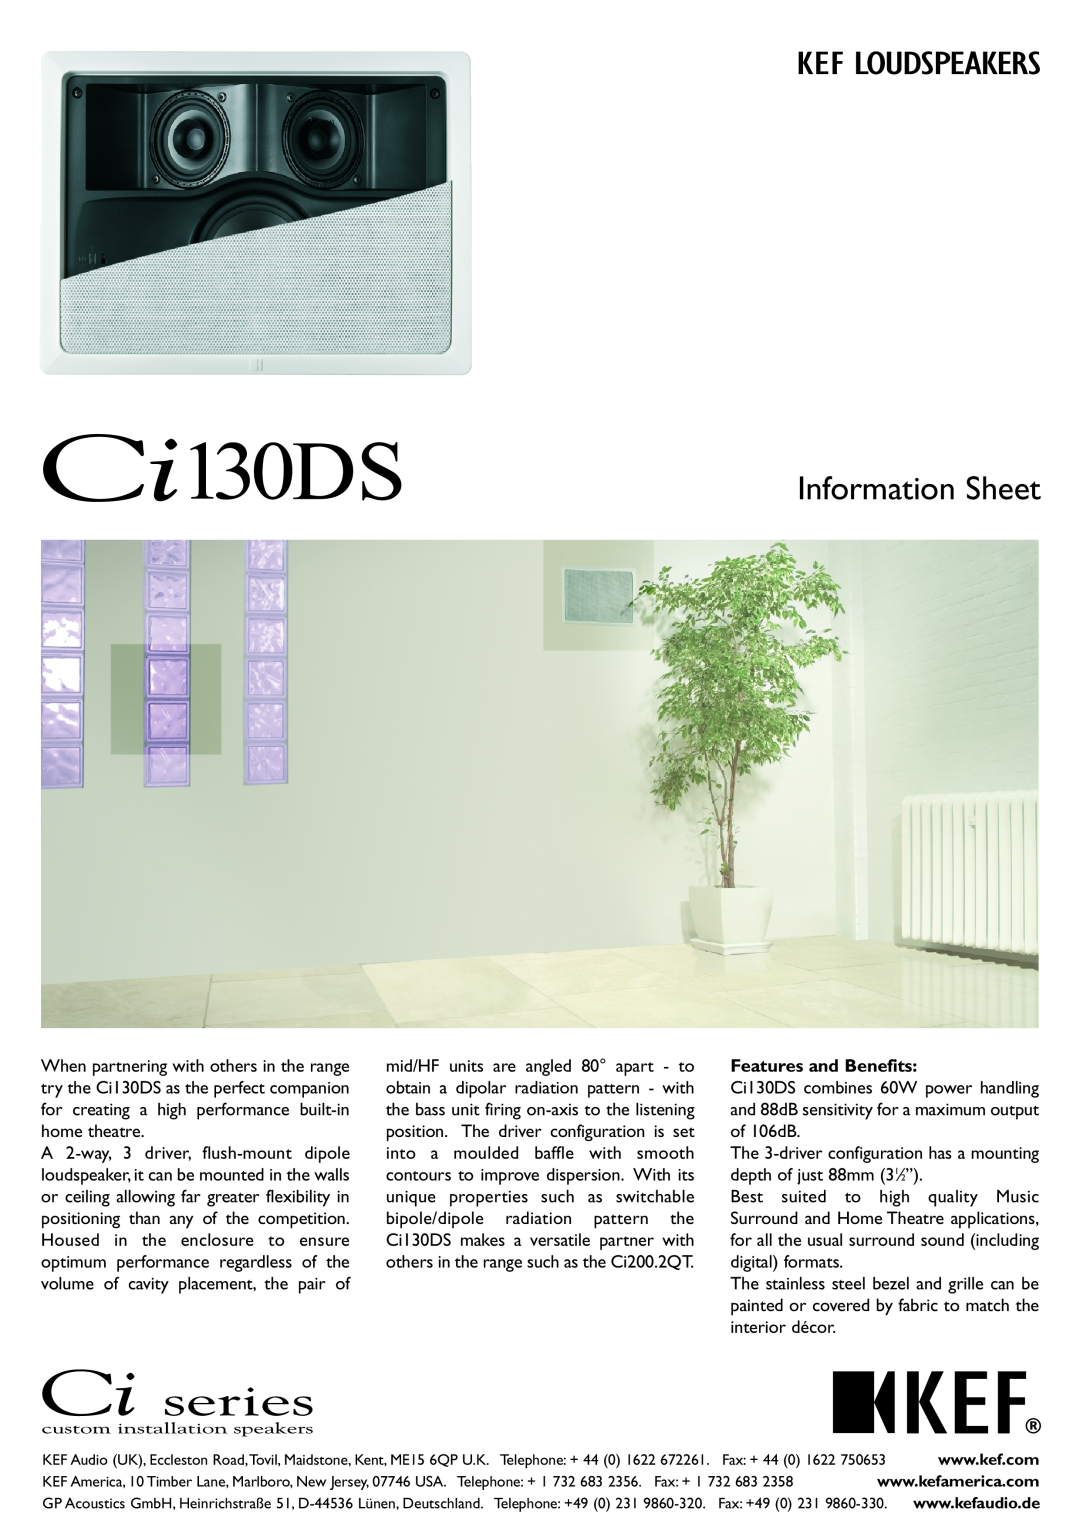 KEF Audio Ci130DS manual Features and Benefits, Information Sheet 